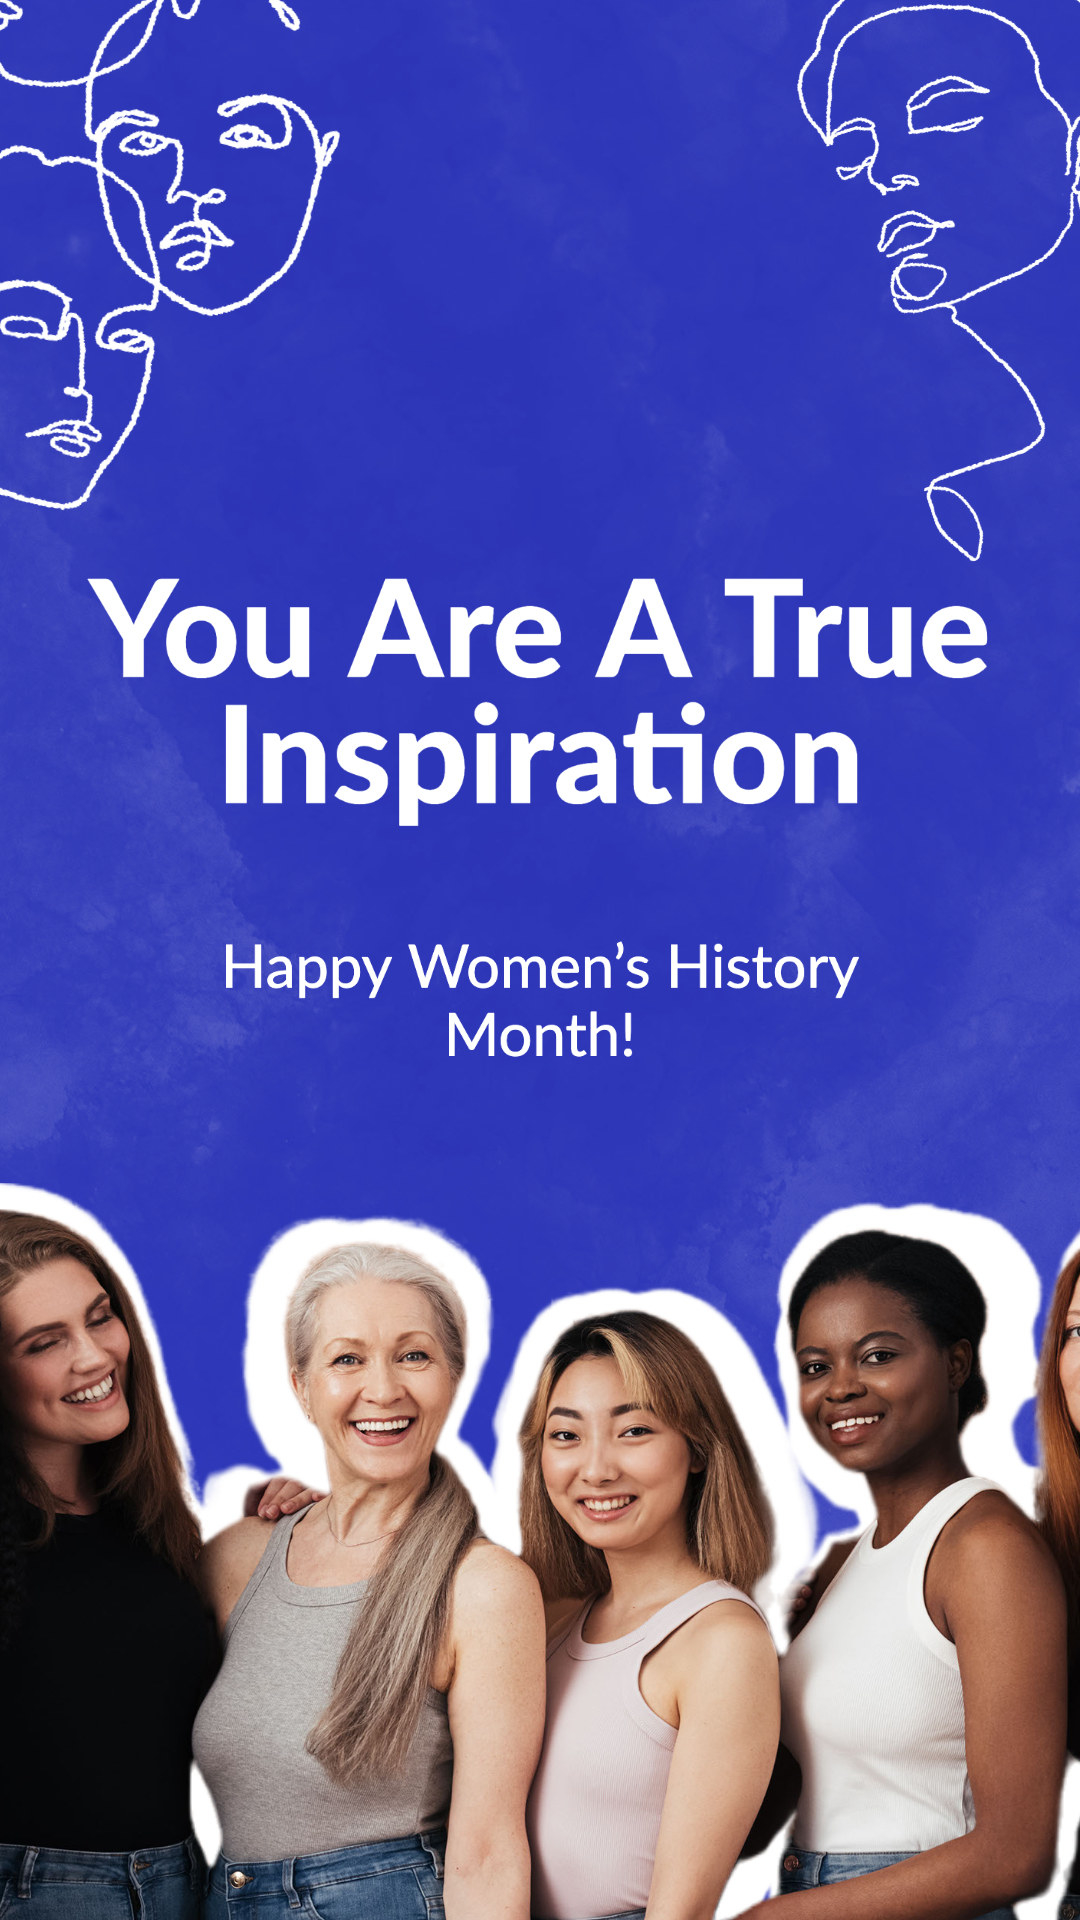 Graphic with photo of woman, with text above saying &quot;You Are A True Inspiration&quot;, and &quot;Happy Women&#x27;s History Month!&quot;